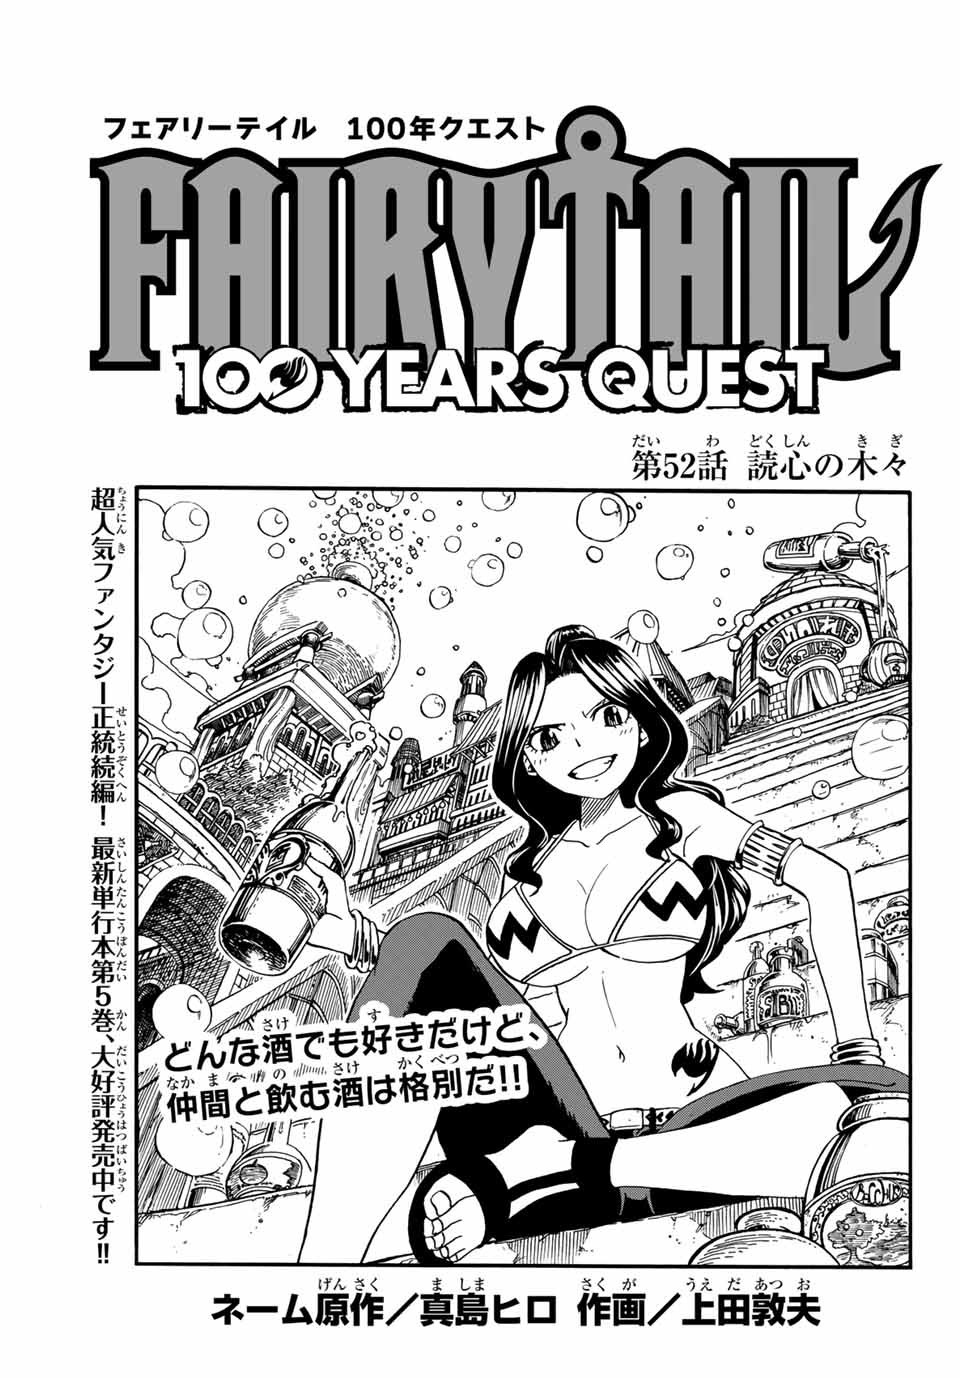 Fairy Tail 100 Years Quest Chapter 52 Fairy Tail Wiki Fandom